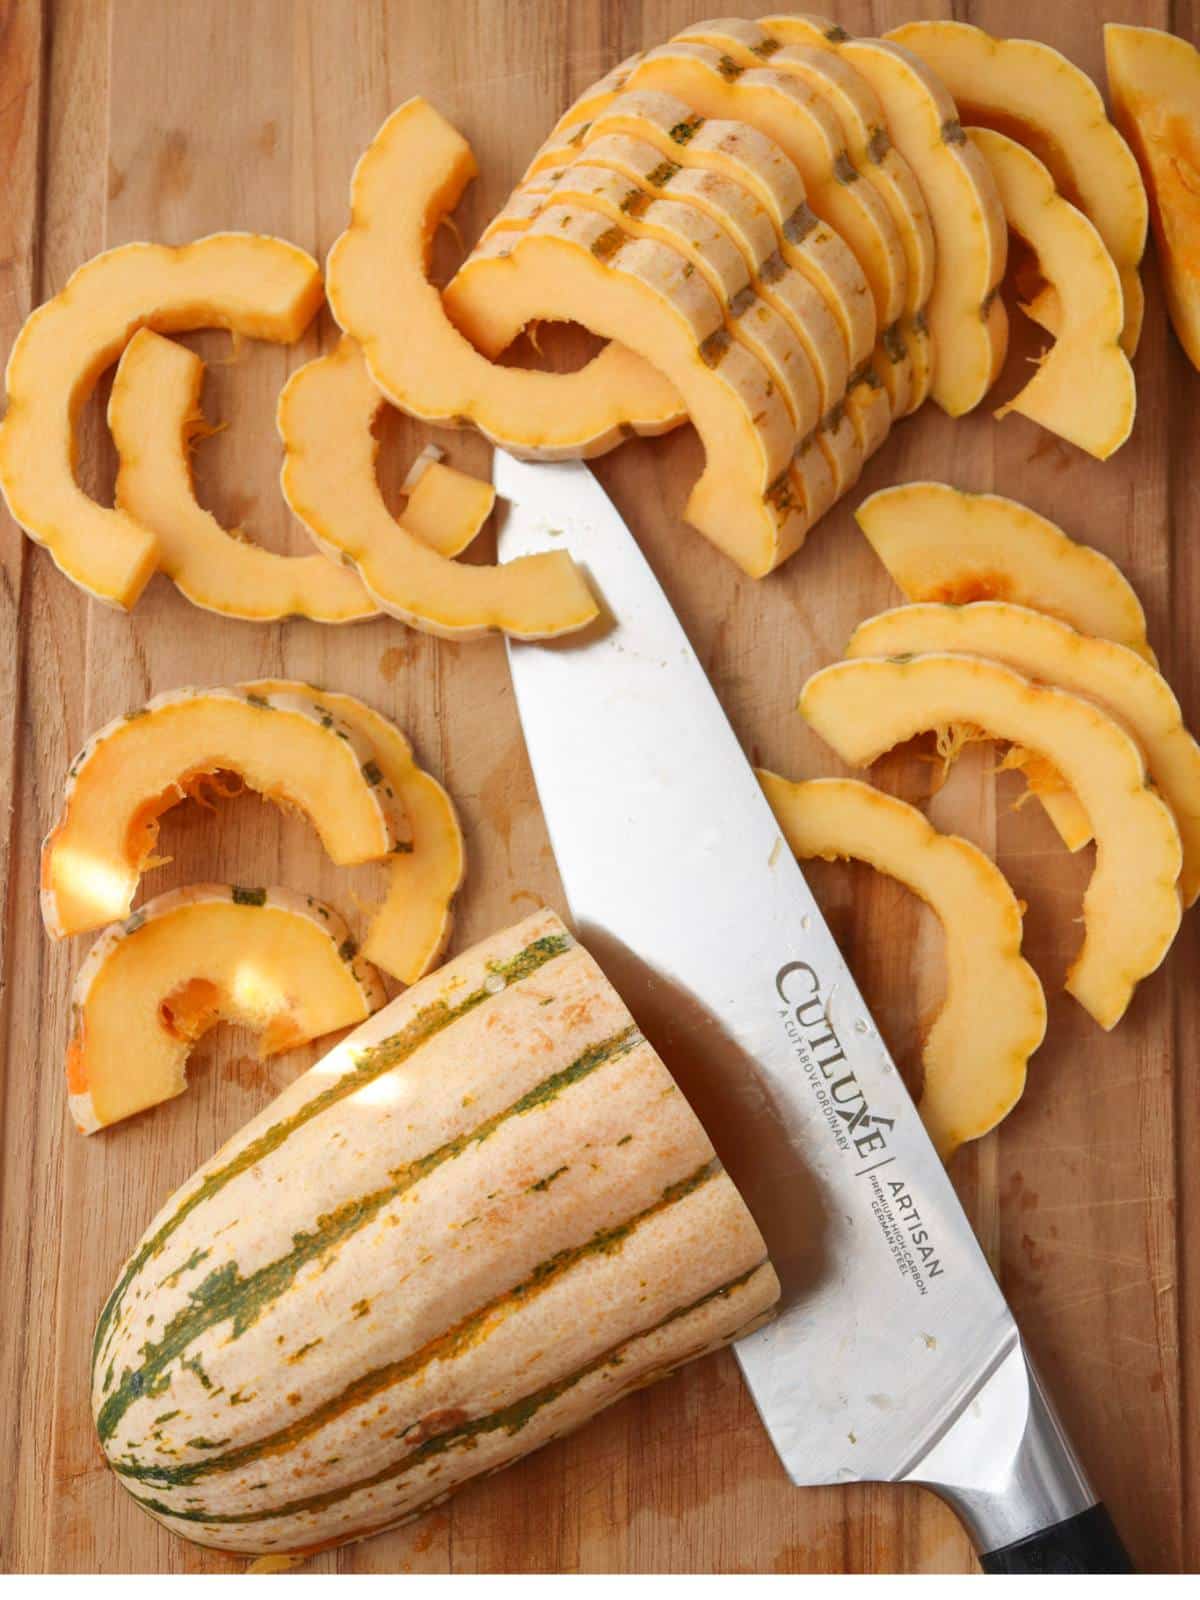 Delicata squash getting cut up on a wooden cutting board into strips.